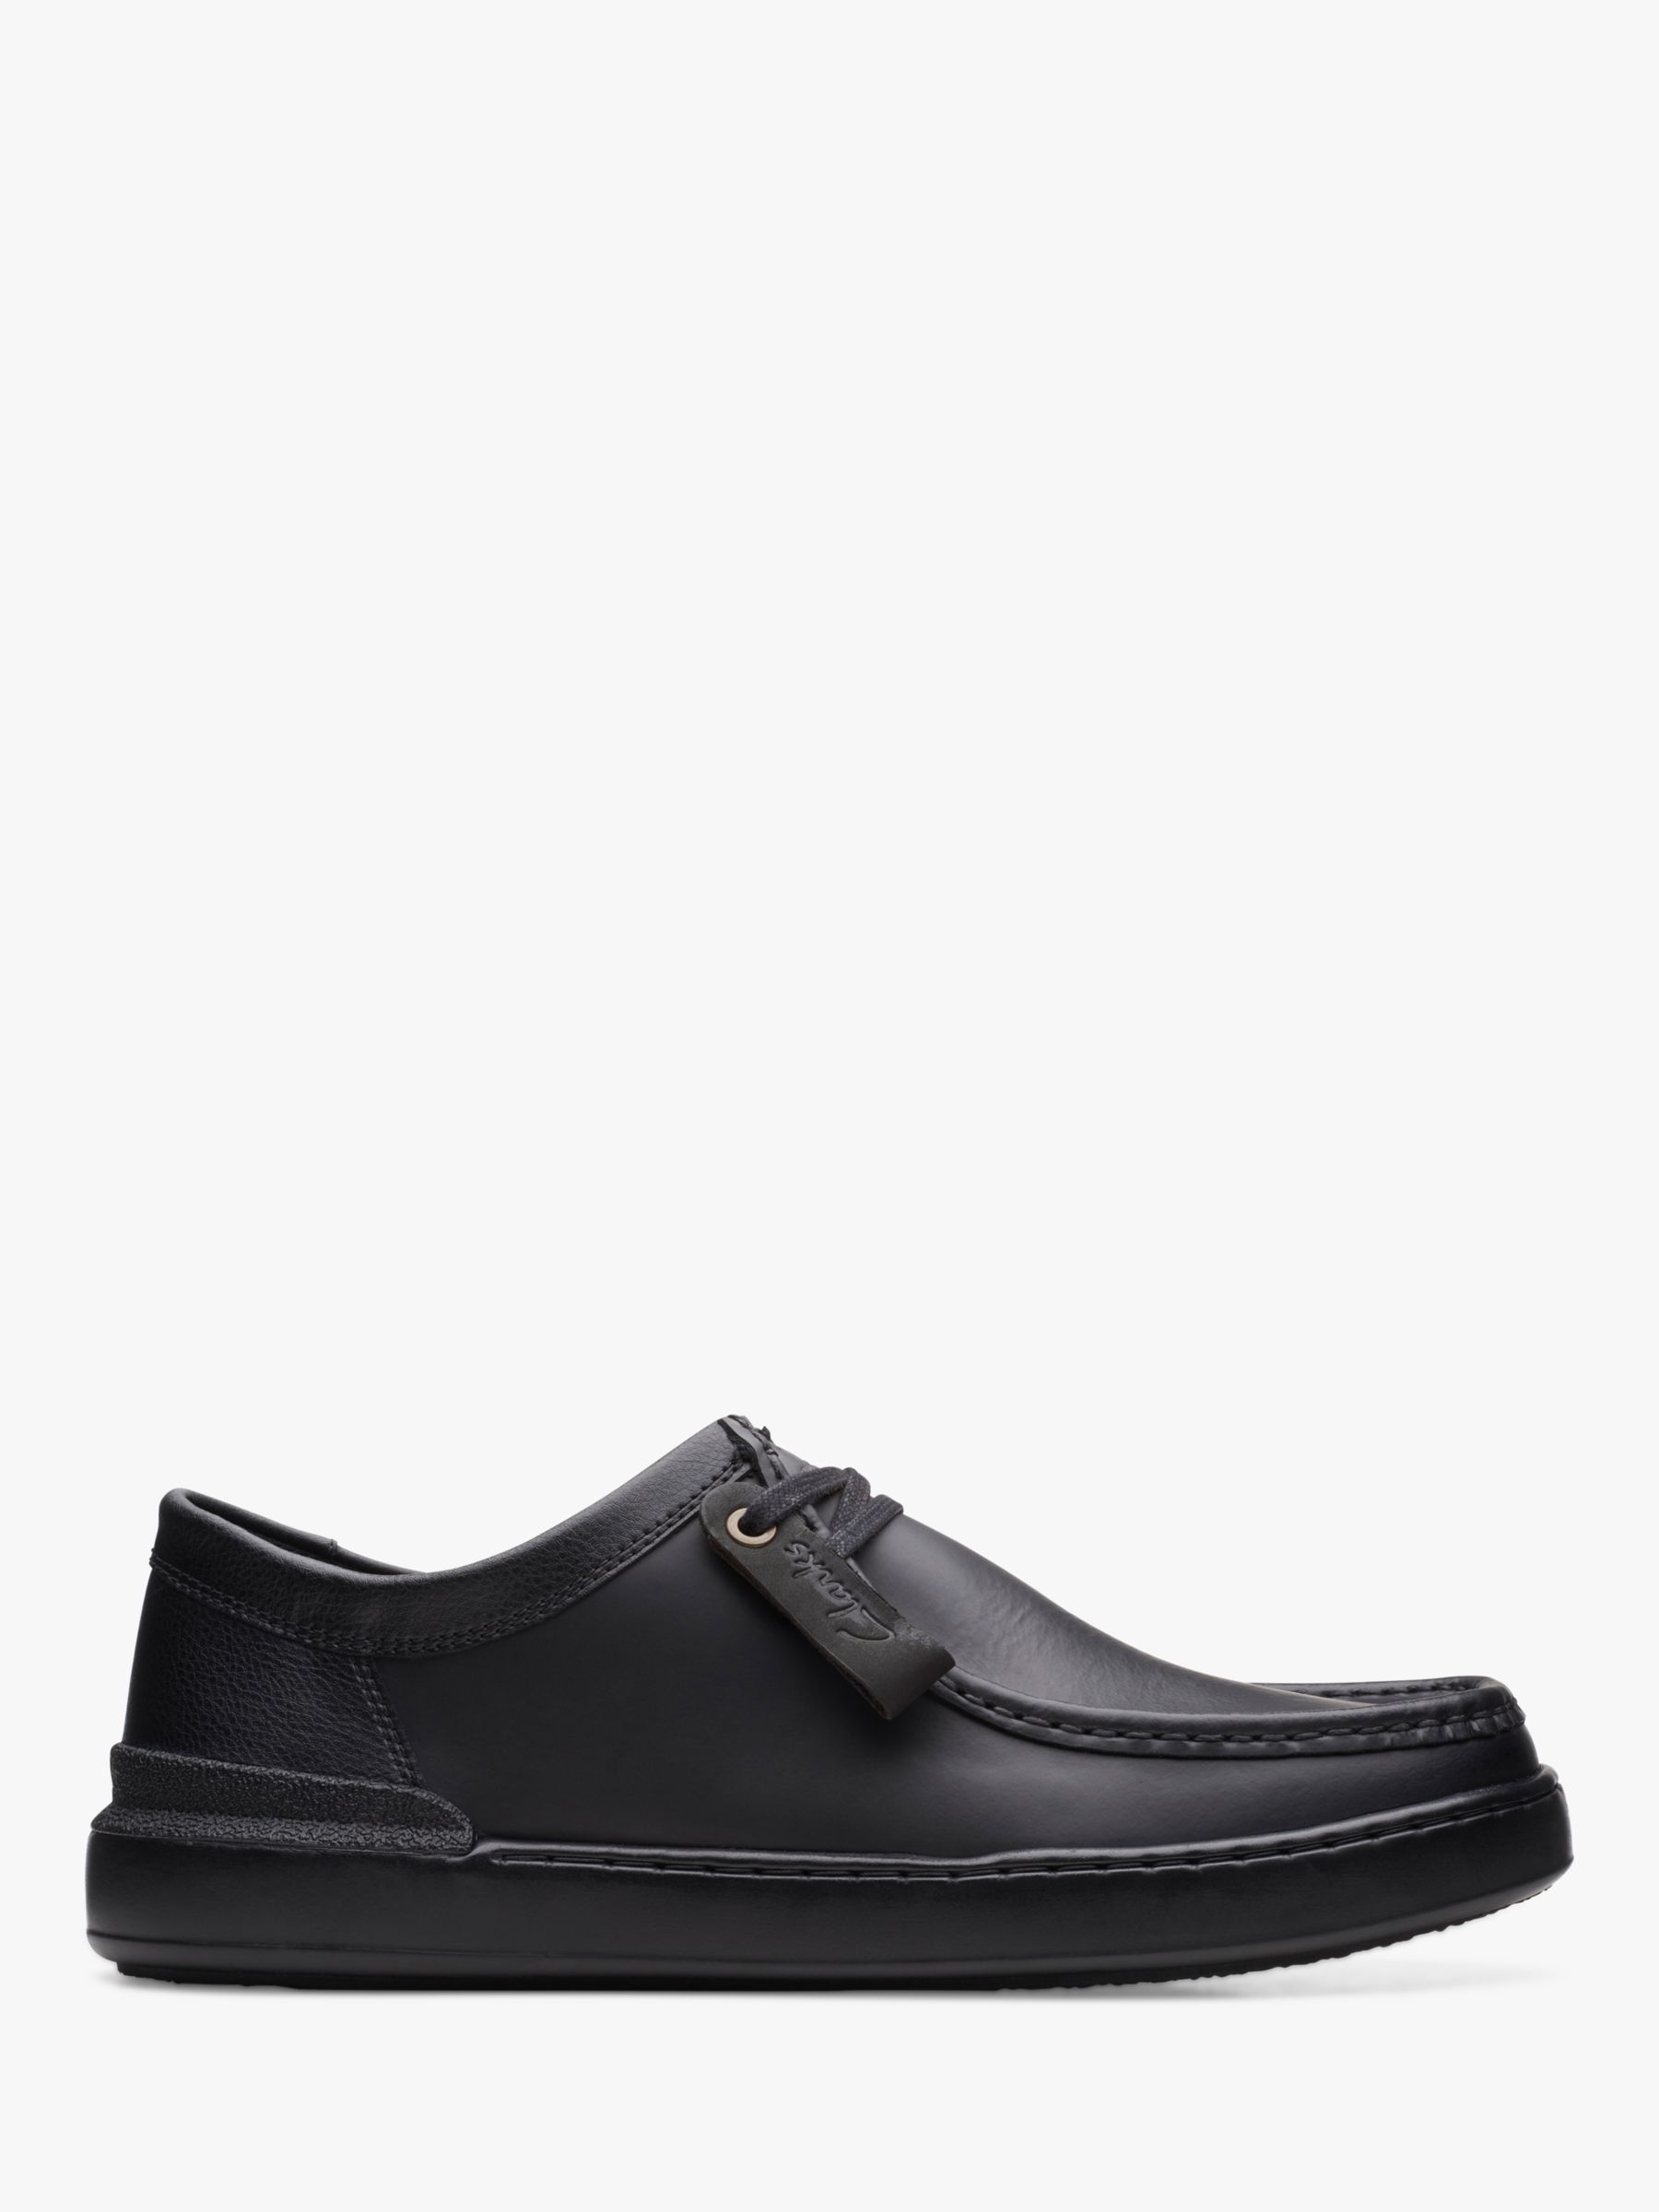 Clarks CourtLite Wally Leather Lace Up Trainers, Black at John Lewis ...